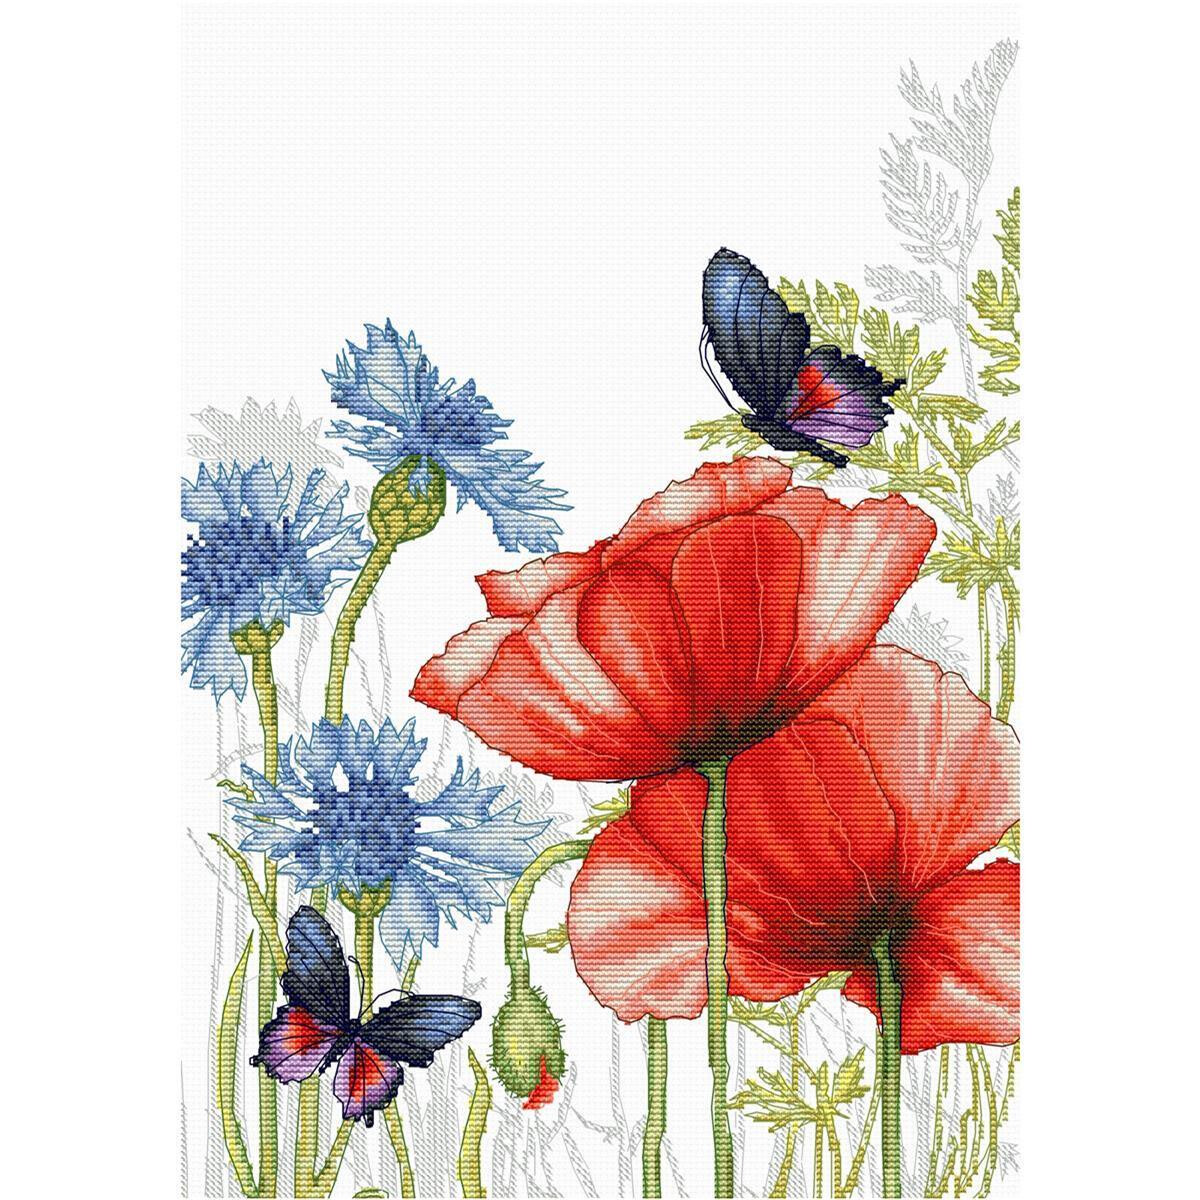 A vibrant cross stitch depicting red poppies and blue...